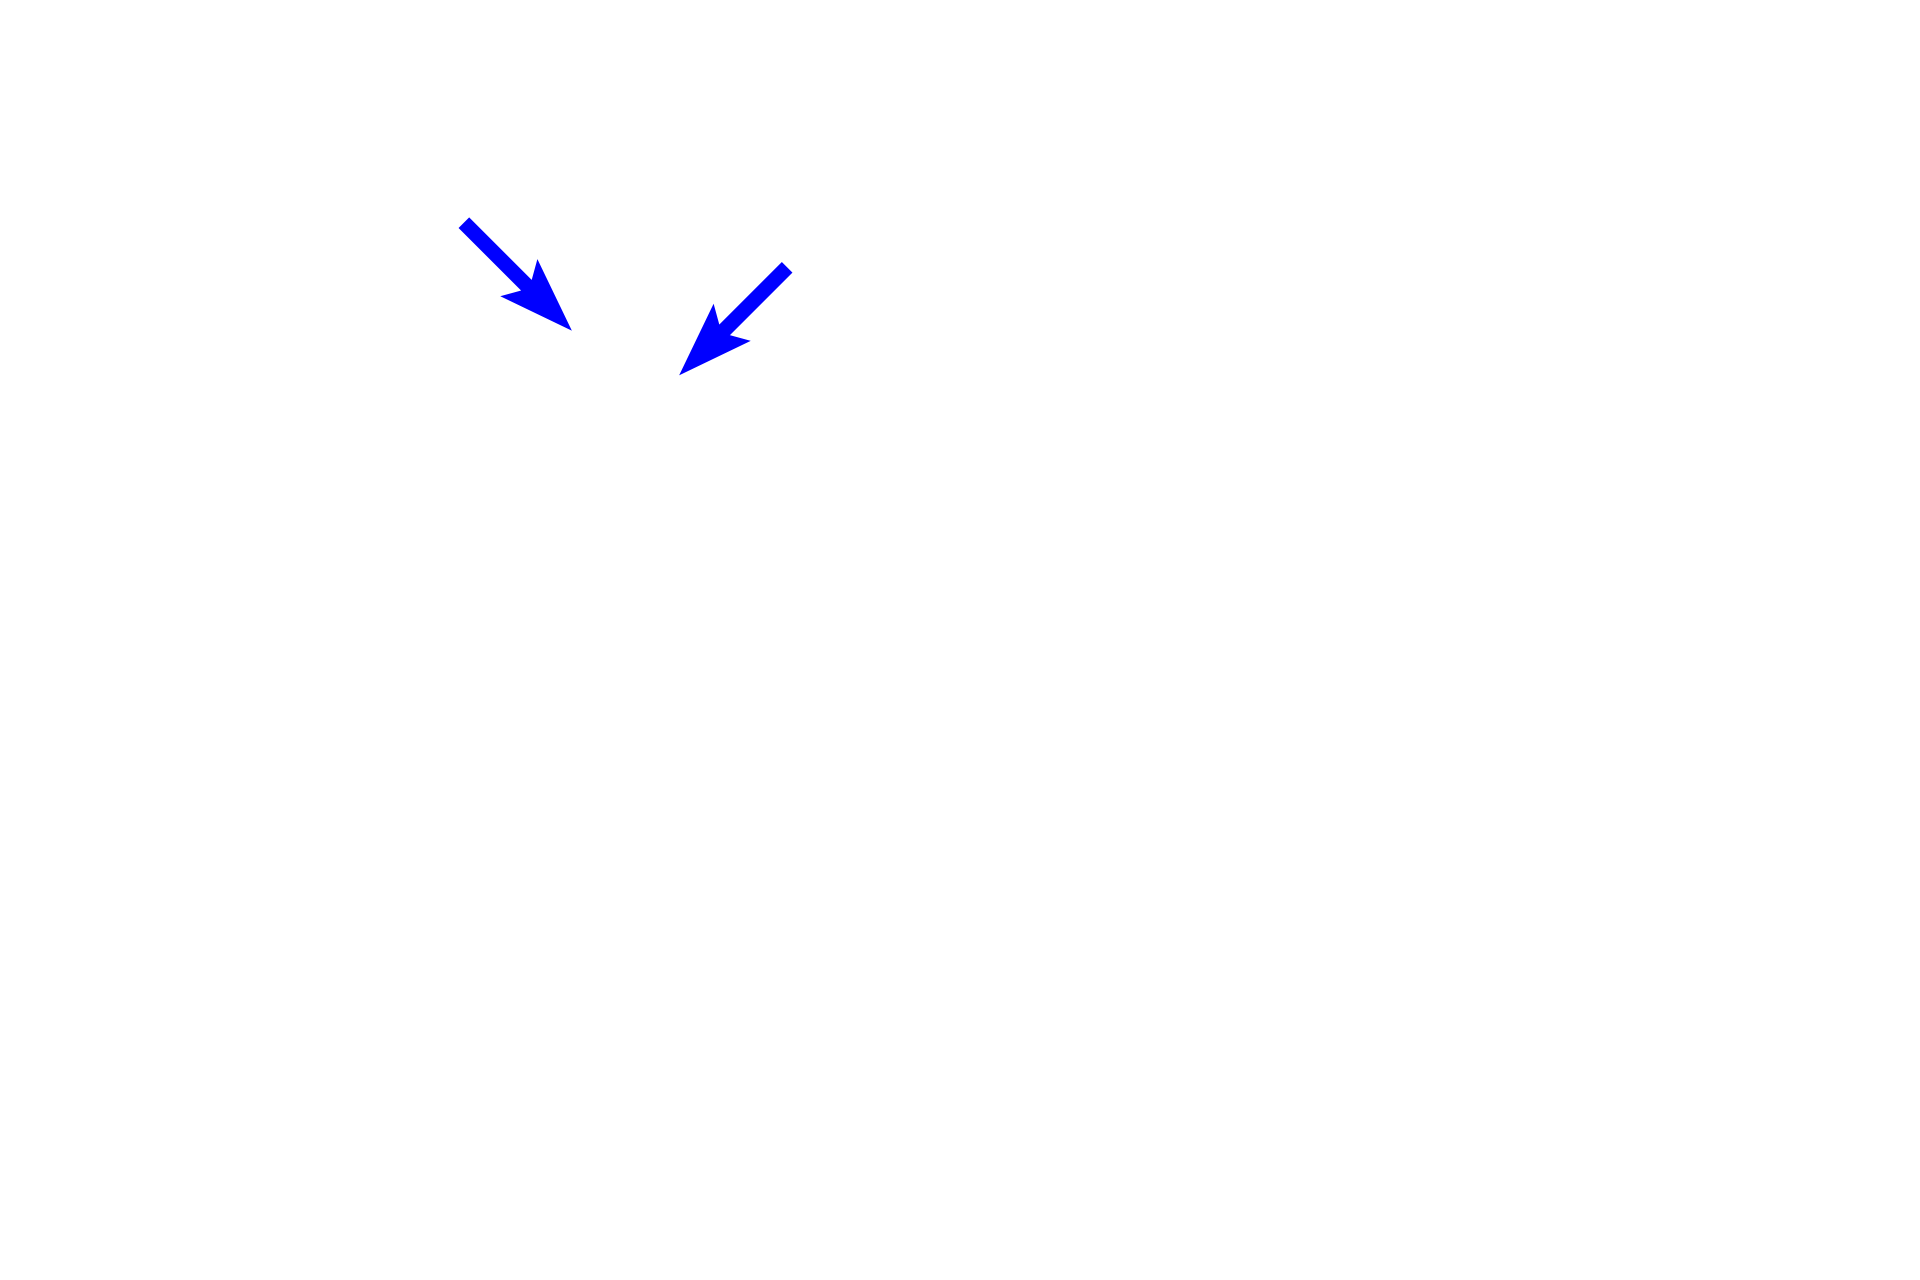 Contractile ring <p>The cleavage furrow, marking the eventual separation site of the daughter cells, is formed by a contractile ring composed of actin and myosin filaments.  Interaction between the filaments tightens the ring and eventually pinches the cell into two daughter cells.</p>
